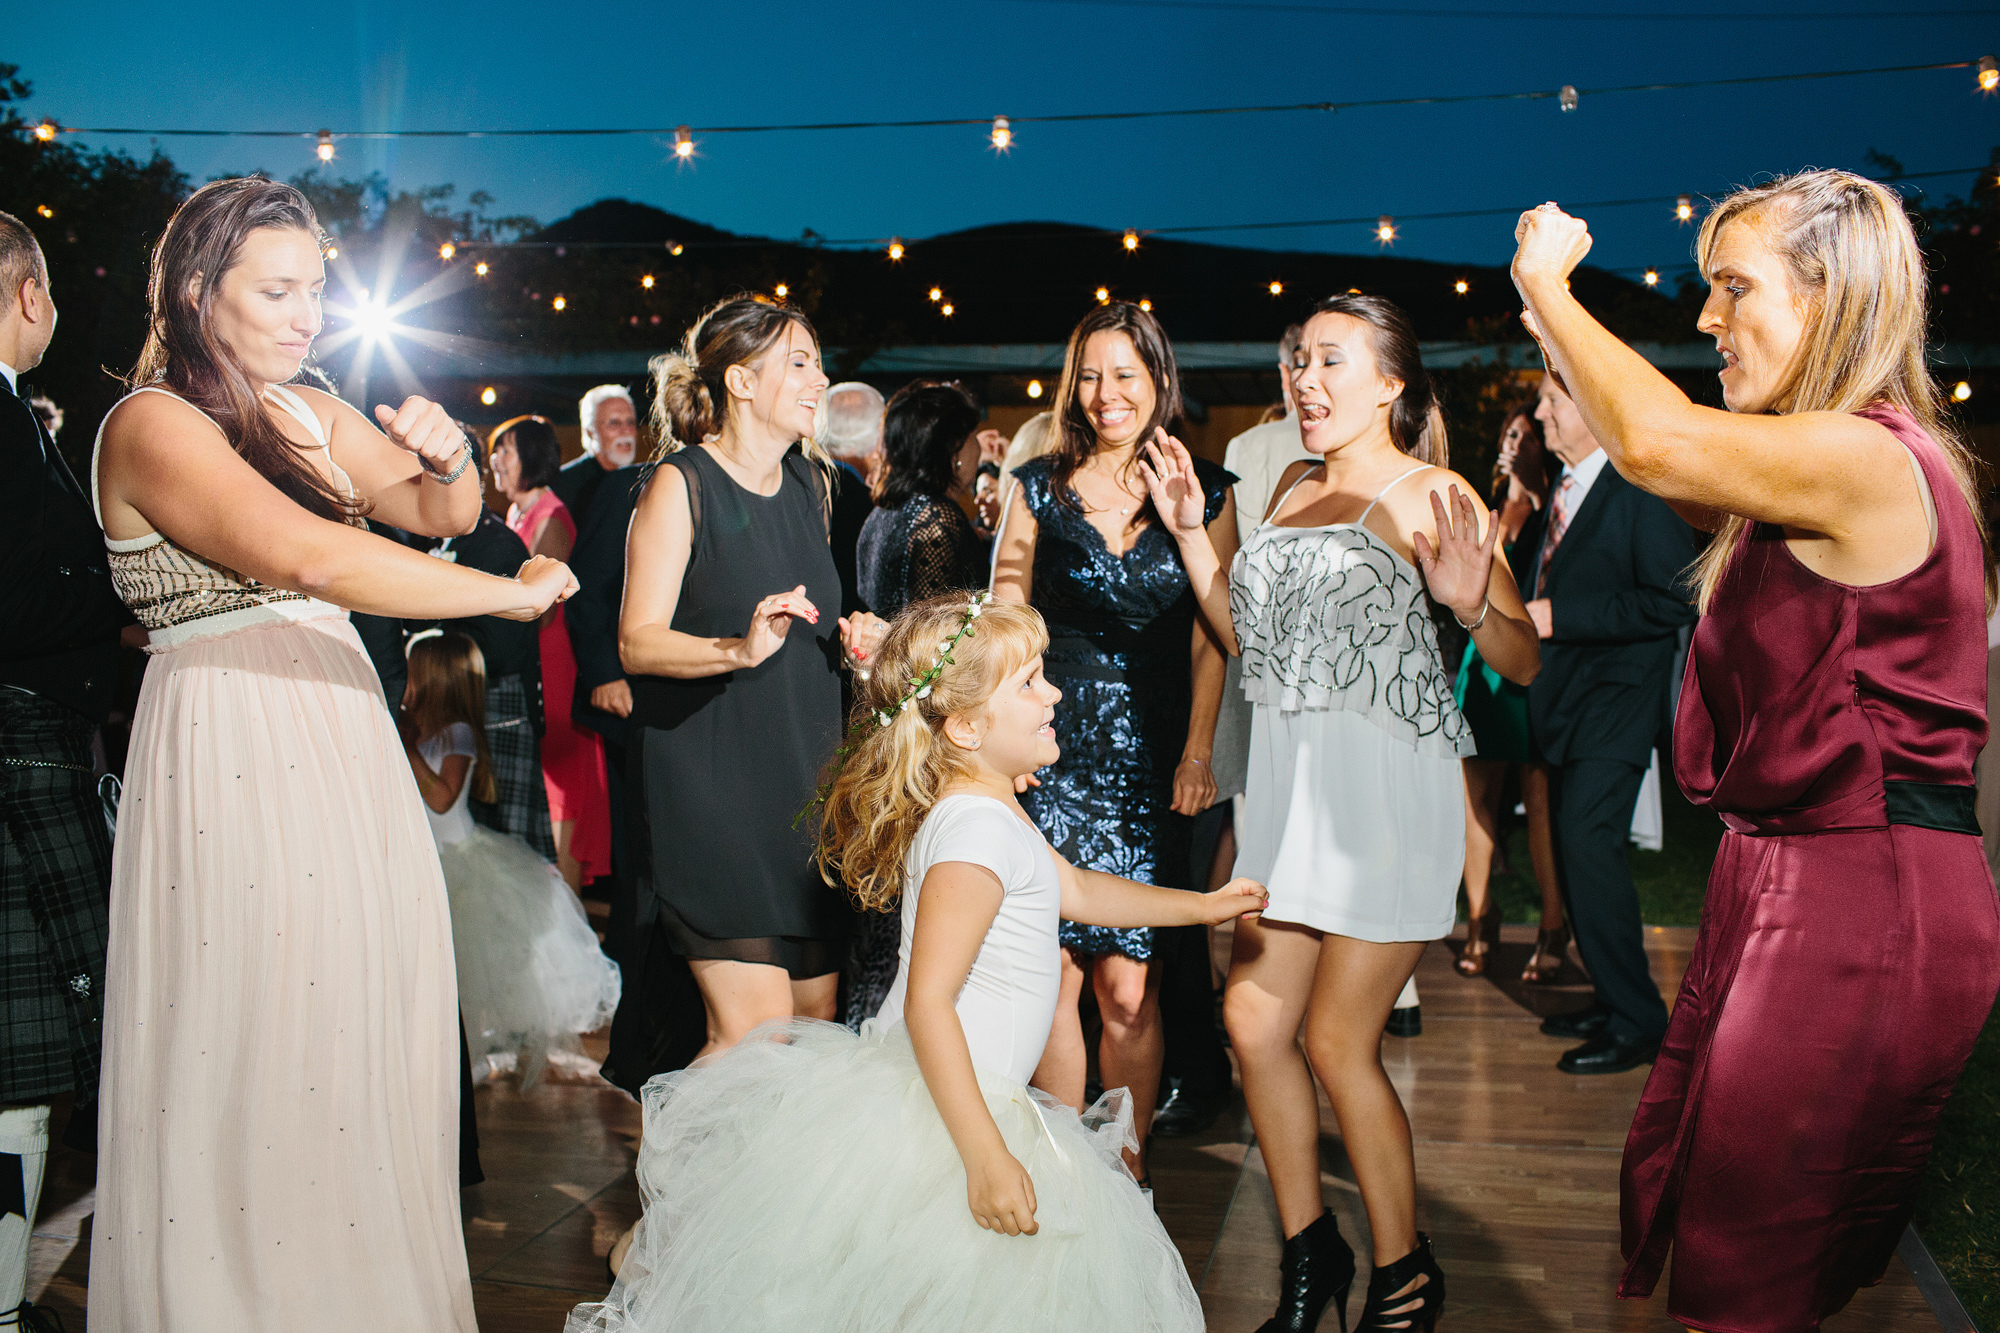 The guests and flower girl dancing during the reception. 